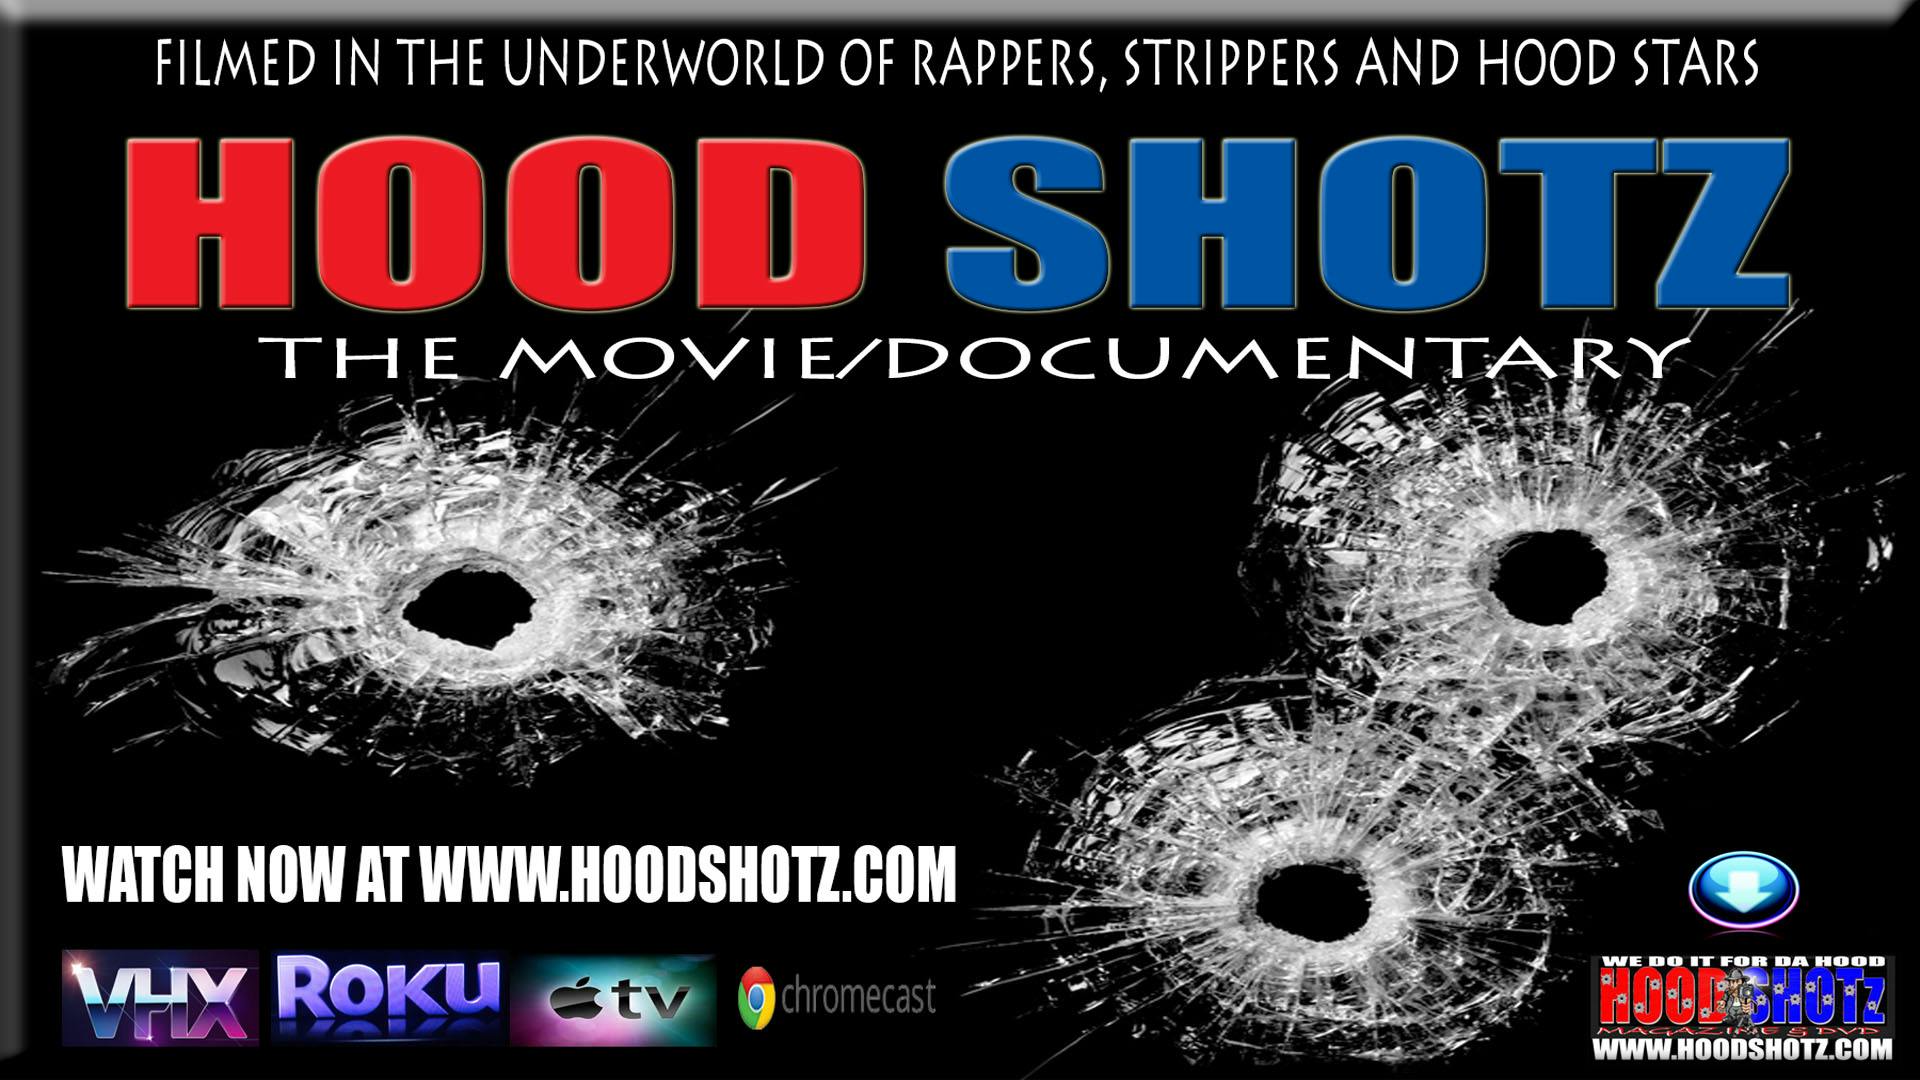 cary lucas recommends strippers in the hood videos pic